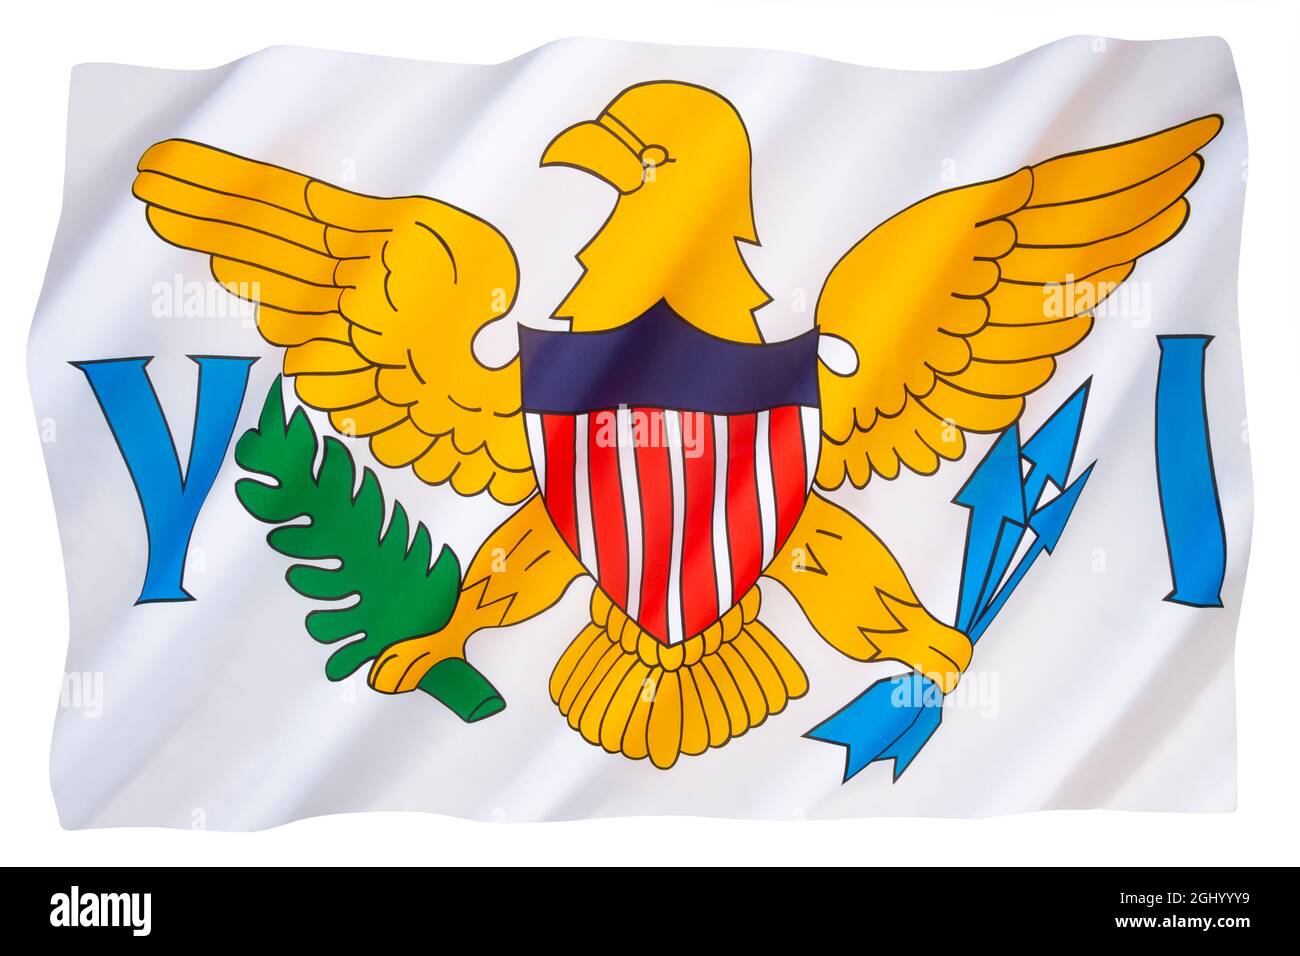 The flag of the United States Virgin Islands was adopted in 1921. It consists of a simplified version of the coat of arms of the United States between Stock Photo